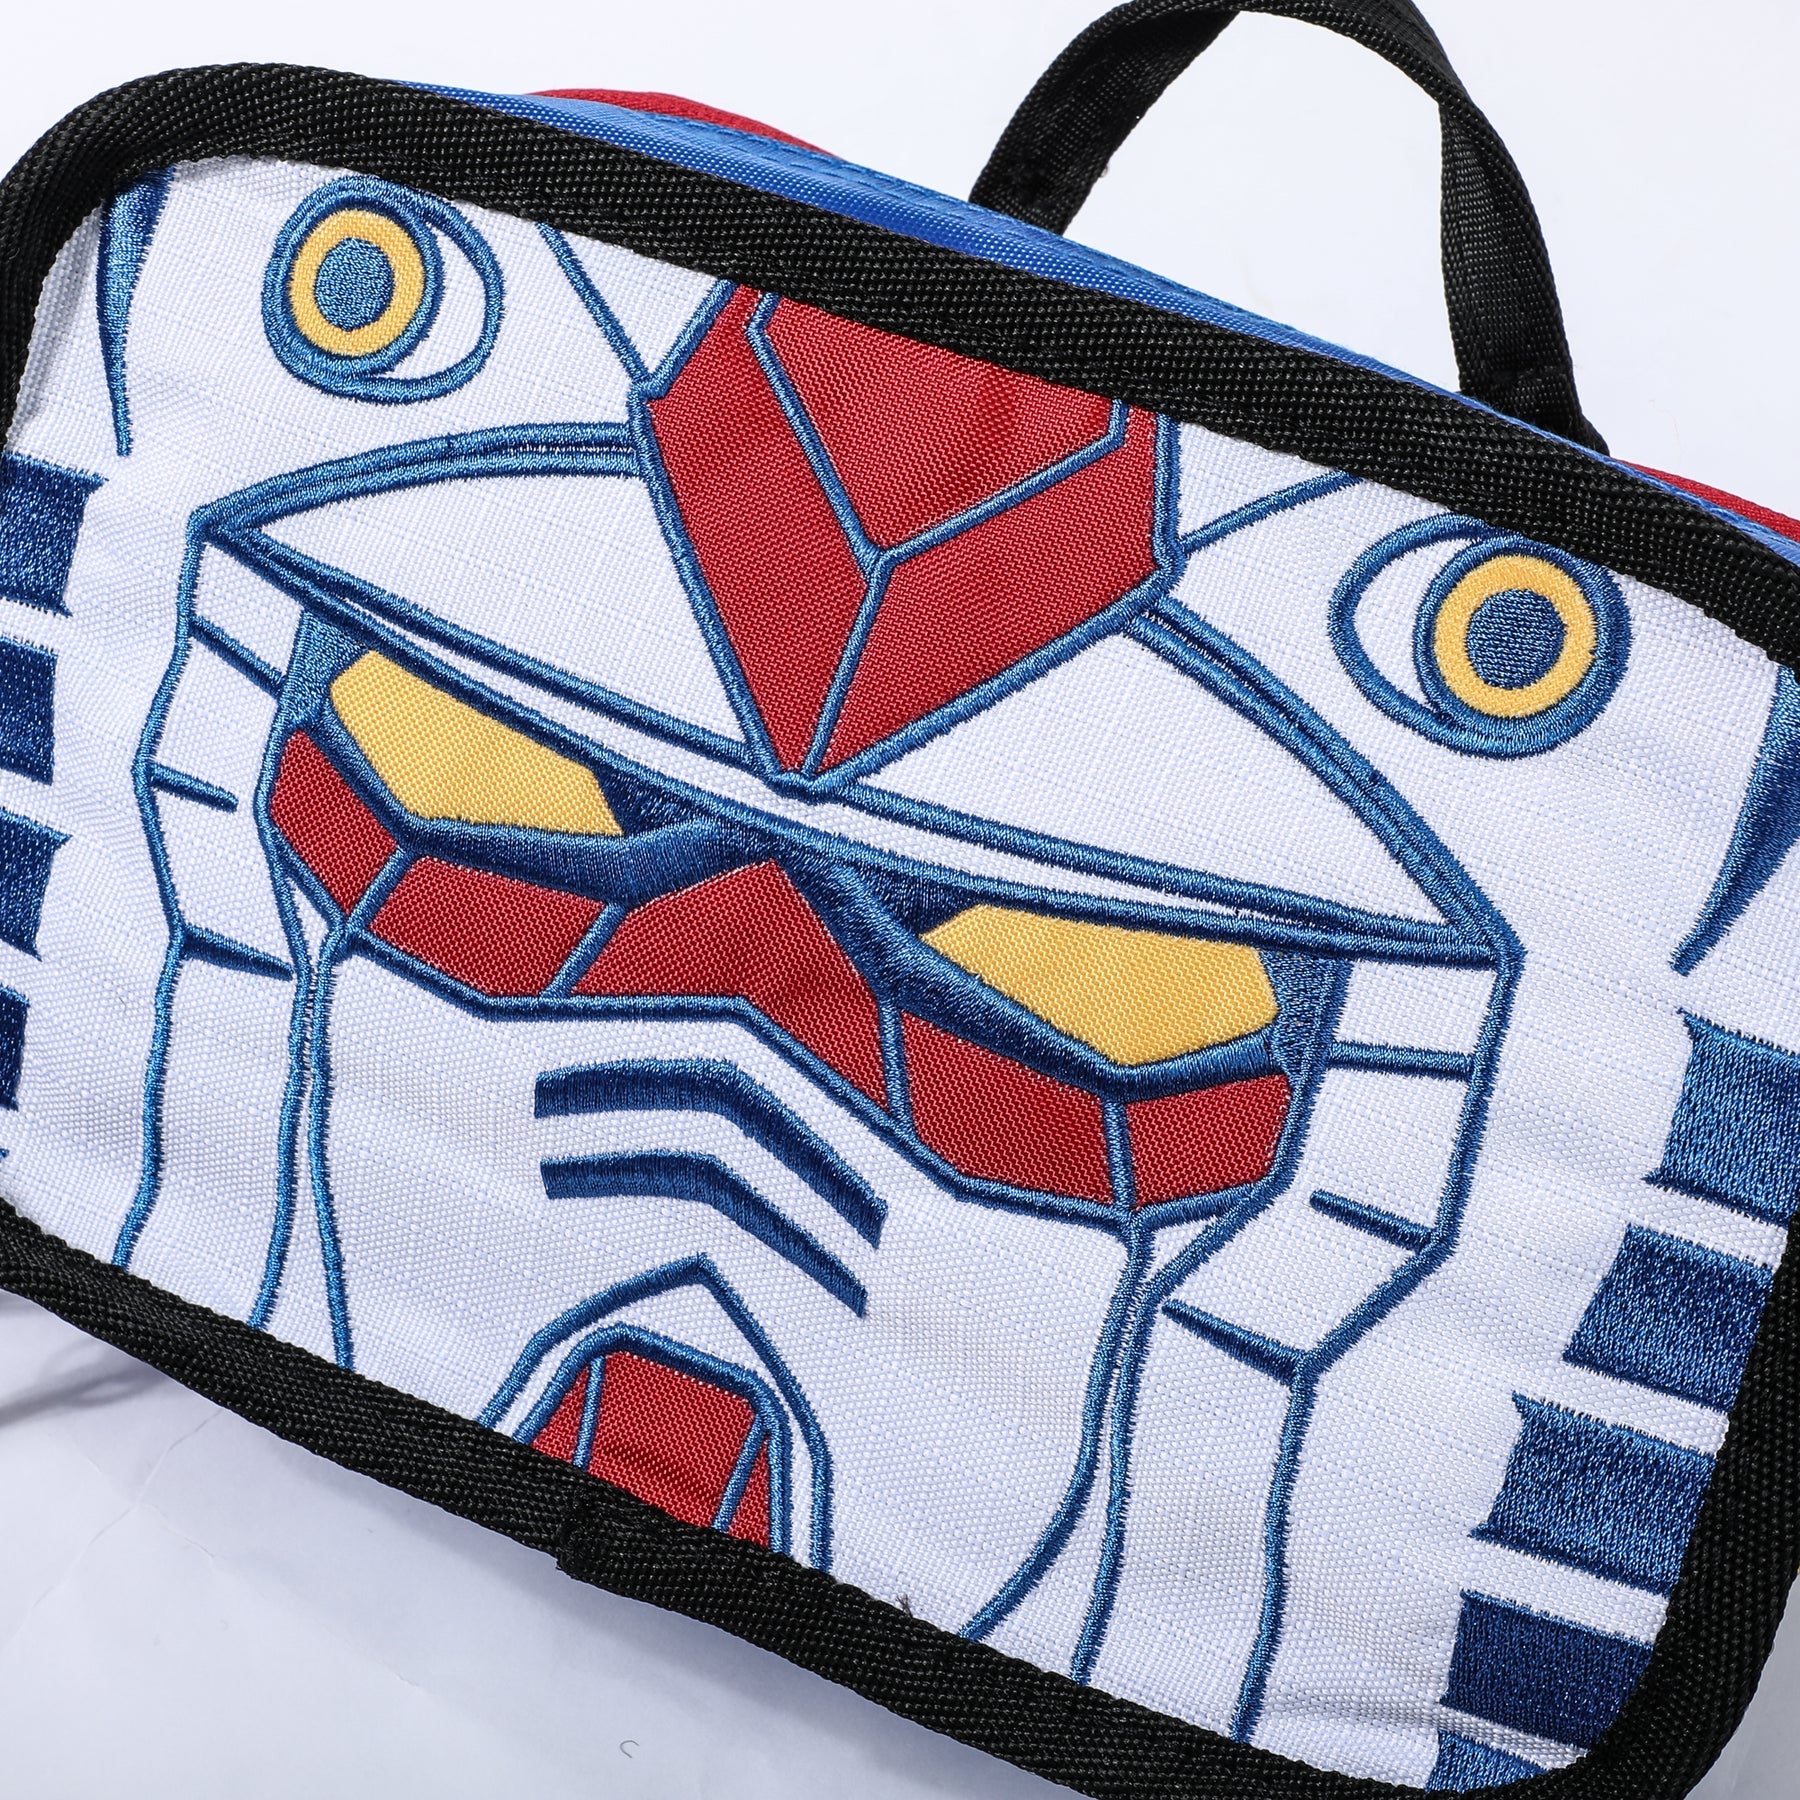 Gundam RX-78-2 Sling Bag Close Up Front View Zipper Top Handle Embroidered Details